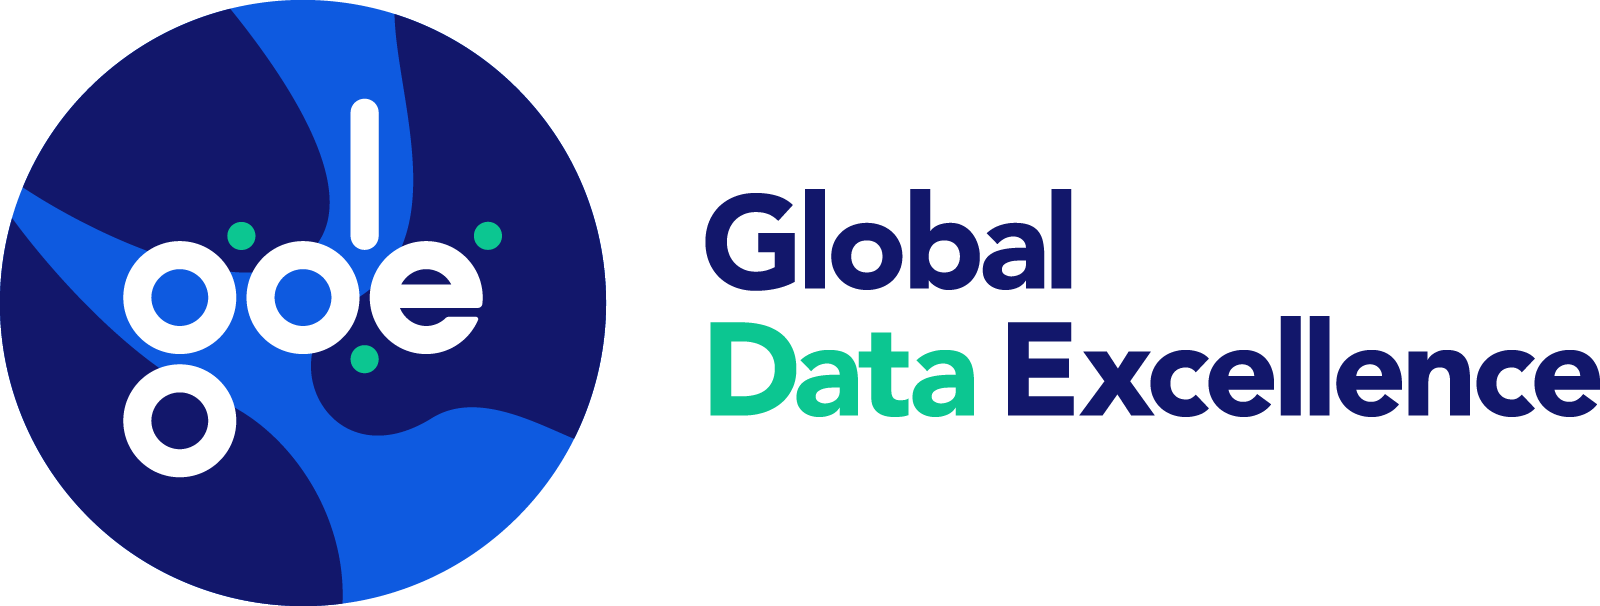 Global Data Excellence